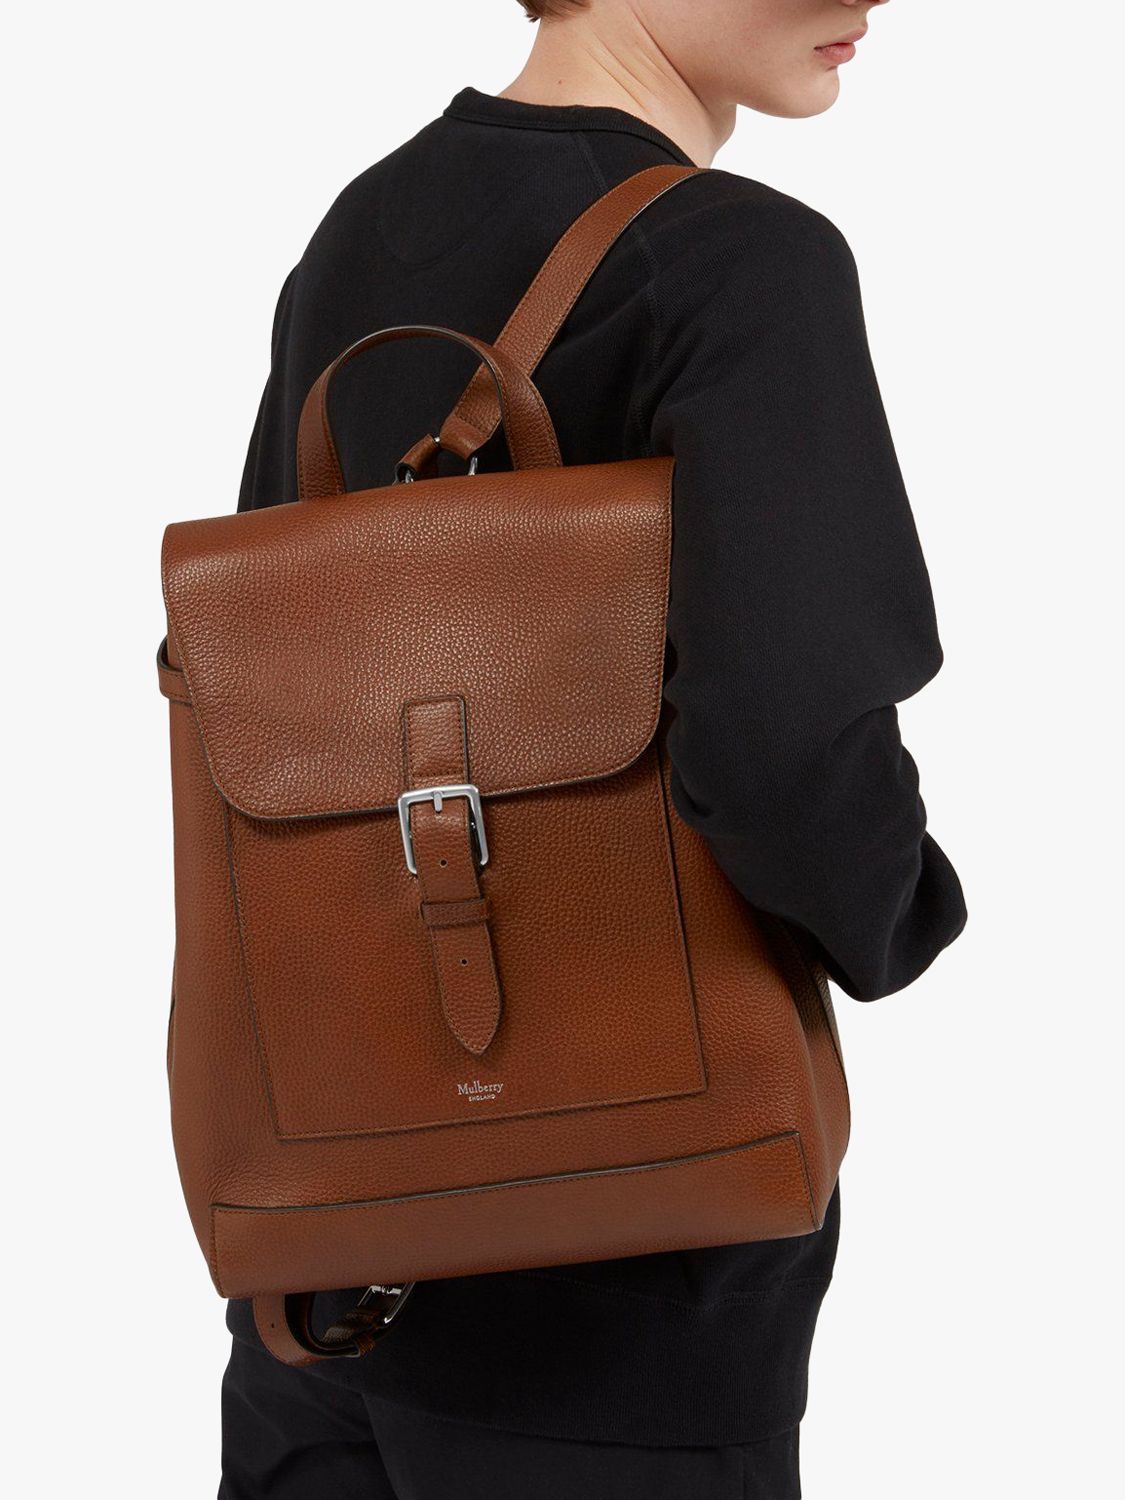 Mulberry Chiltern Small Classic Grain Leather Backpack, Oak